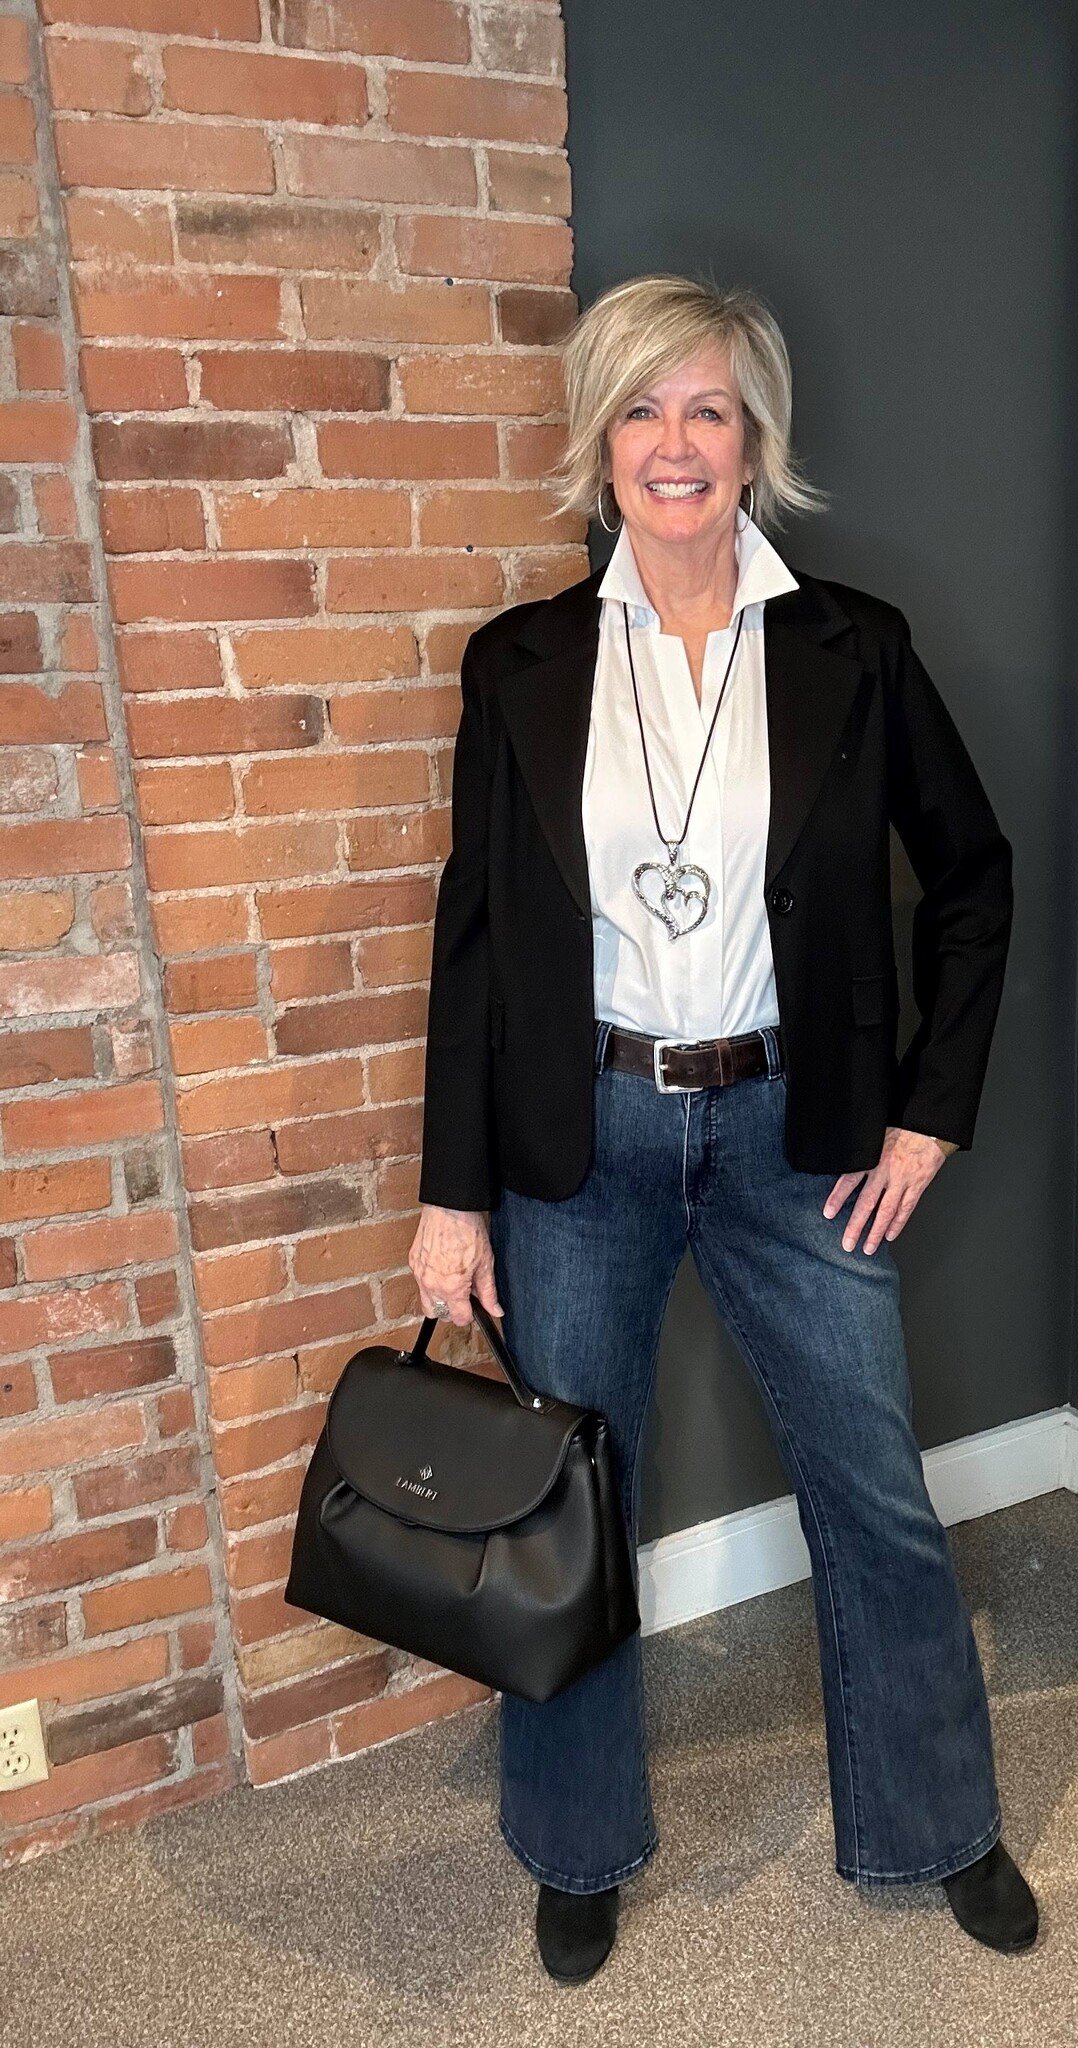 A woman wearing a pair of flared jeans, a white blouse, black blazer and holding a black purse.